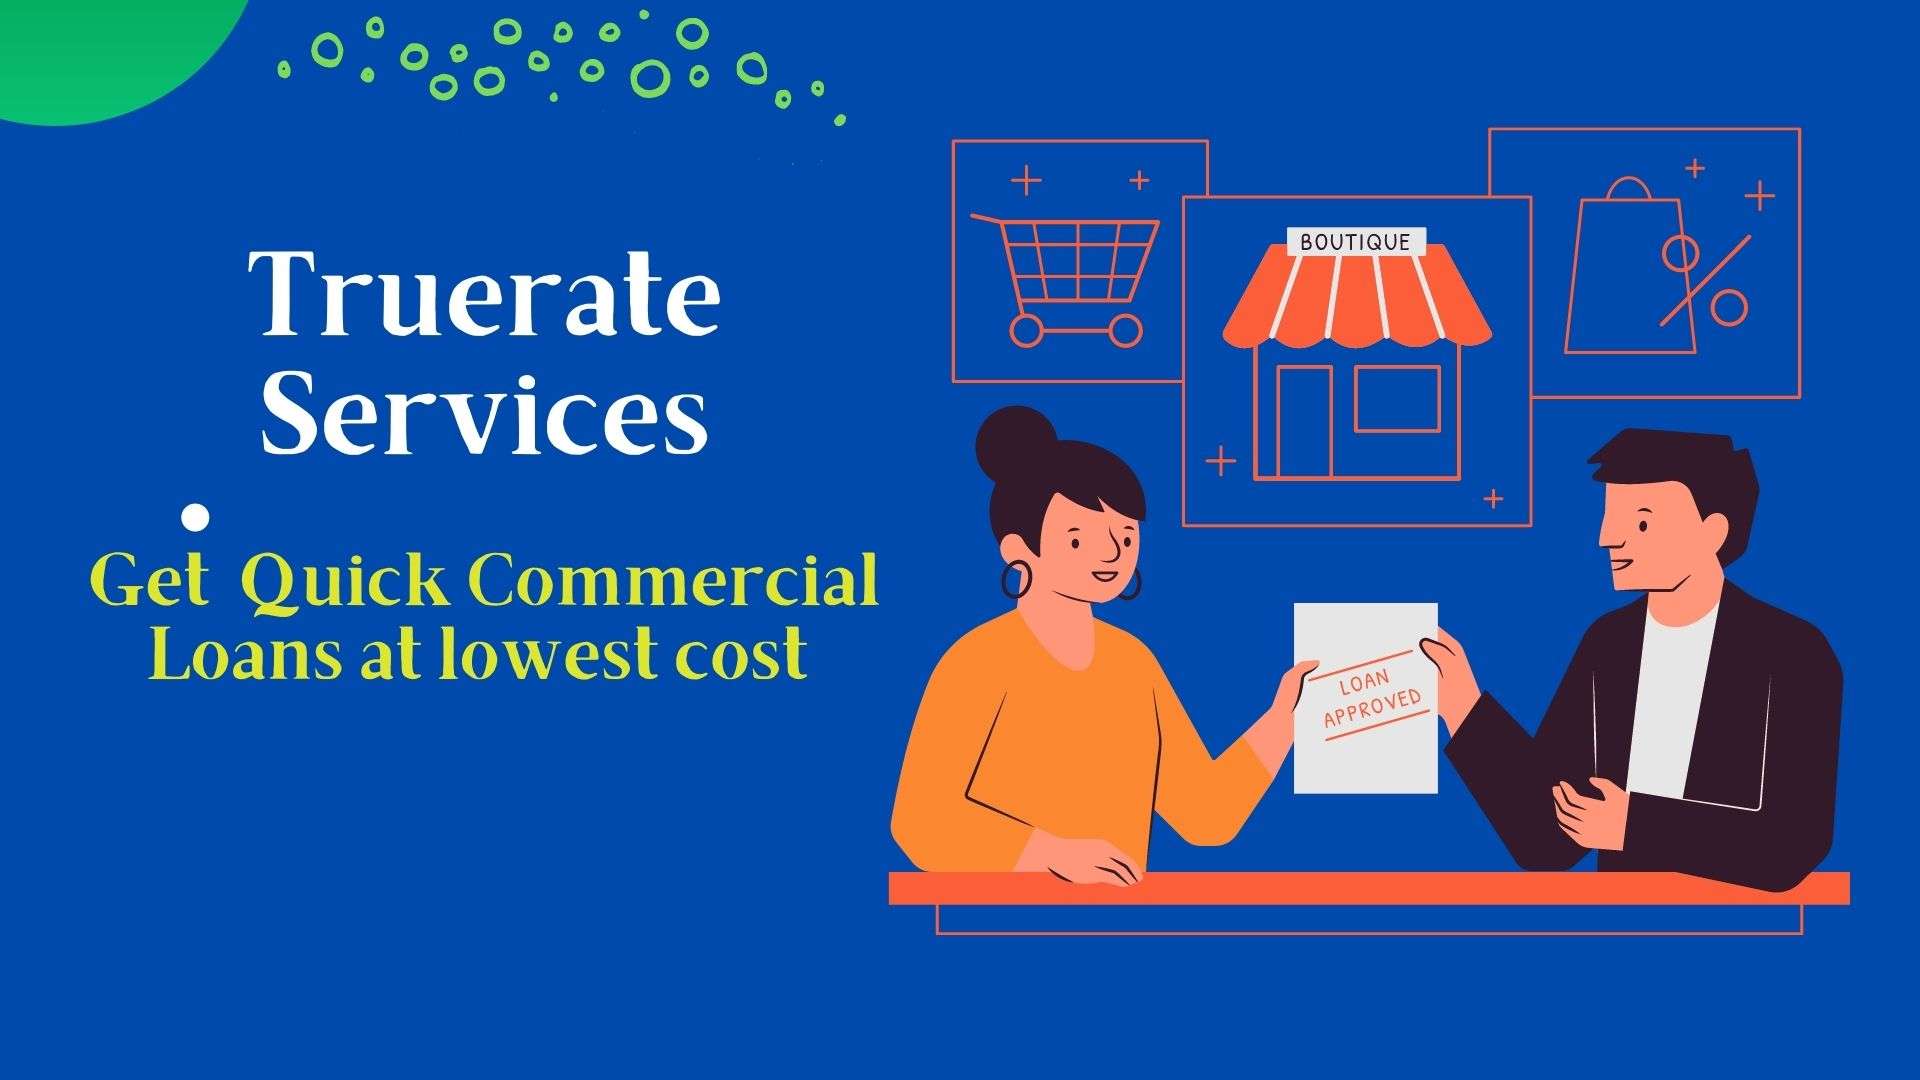 Commercial Loan Truerate services